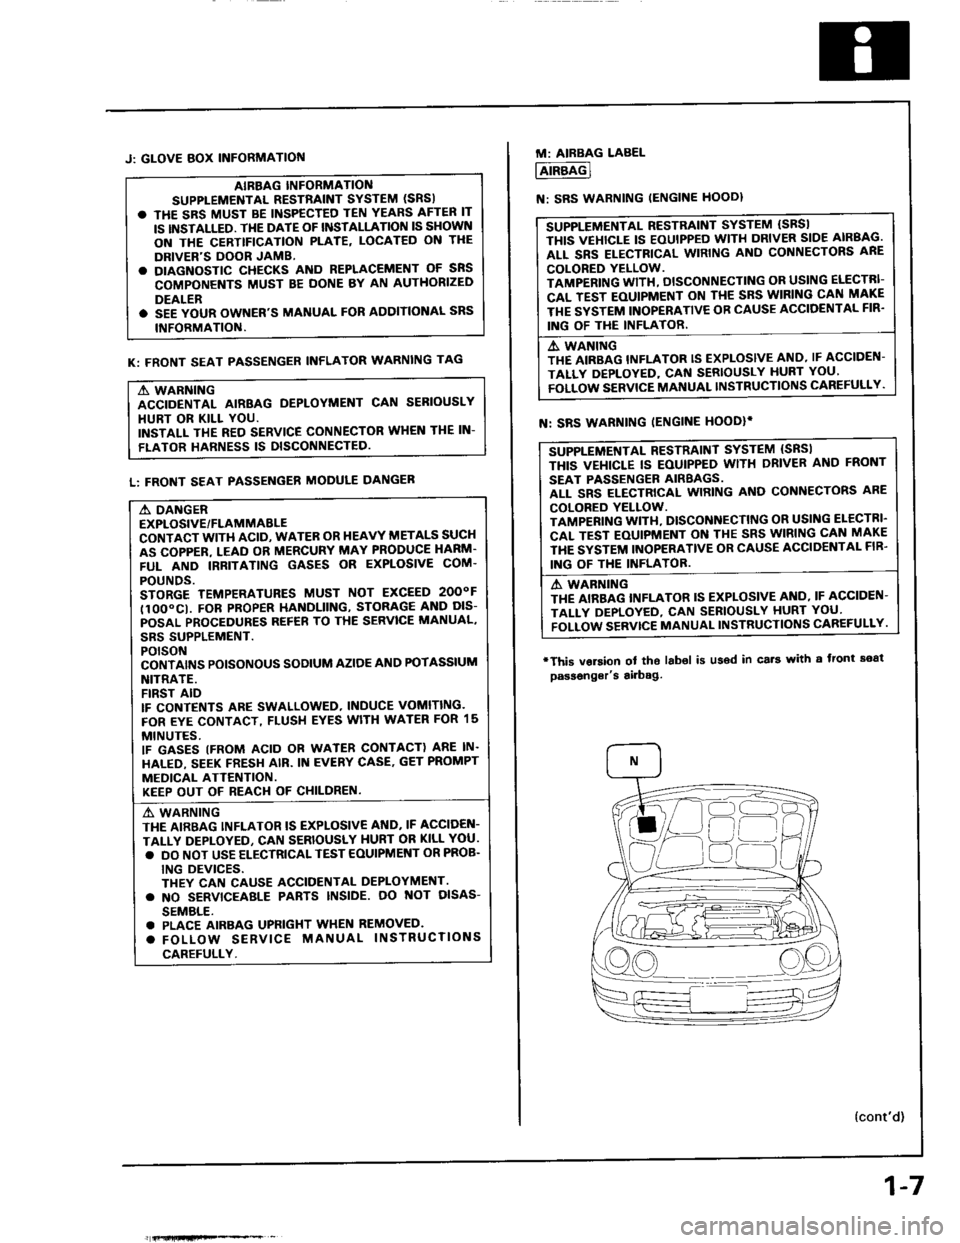 ACURA INTEGRA 1994  Service Repair Manual J: GLOVE BOX INFORMATIOf{
AIBBAG INFORMANO
SUPPLEMENTAL RESTiAINT SYSTEM (SRS)
. THE SRS MUST BE INSPECTED TEN YEARS AFTER IT
IS INSTALLED. TI{E DATE OF INSTALLATION IS SHOWN
ON THE CERTTFICATION PLAT